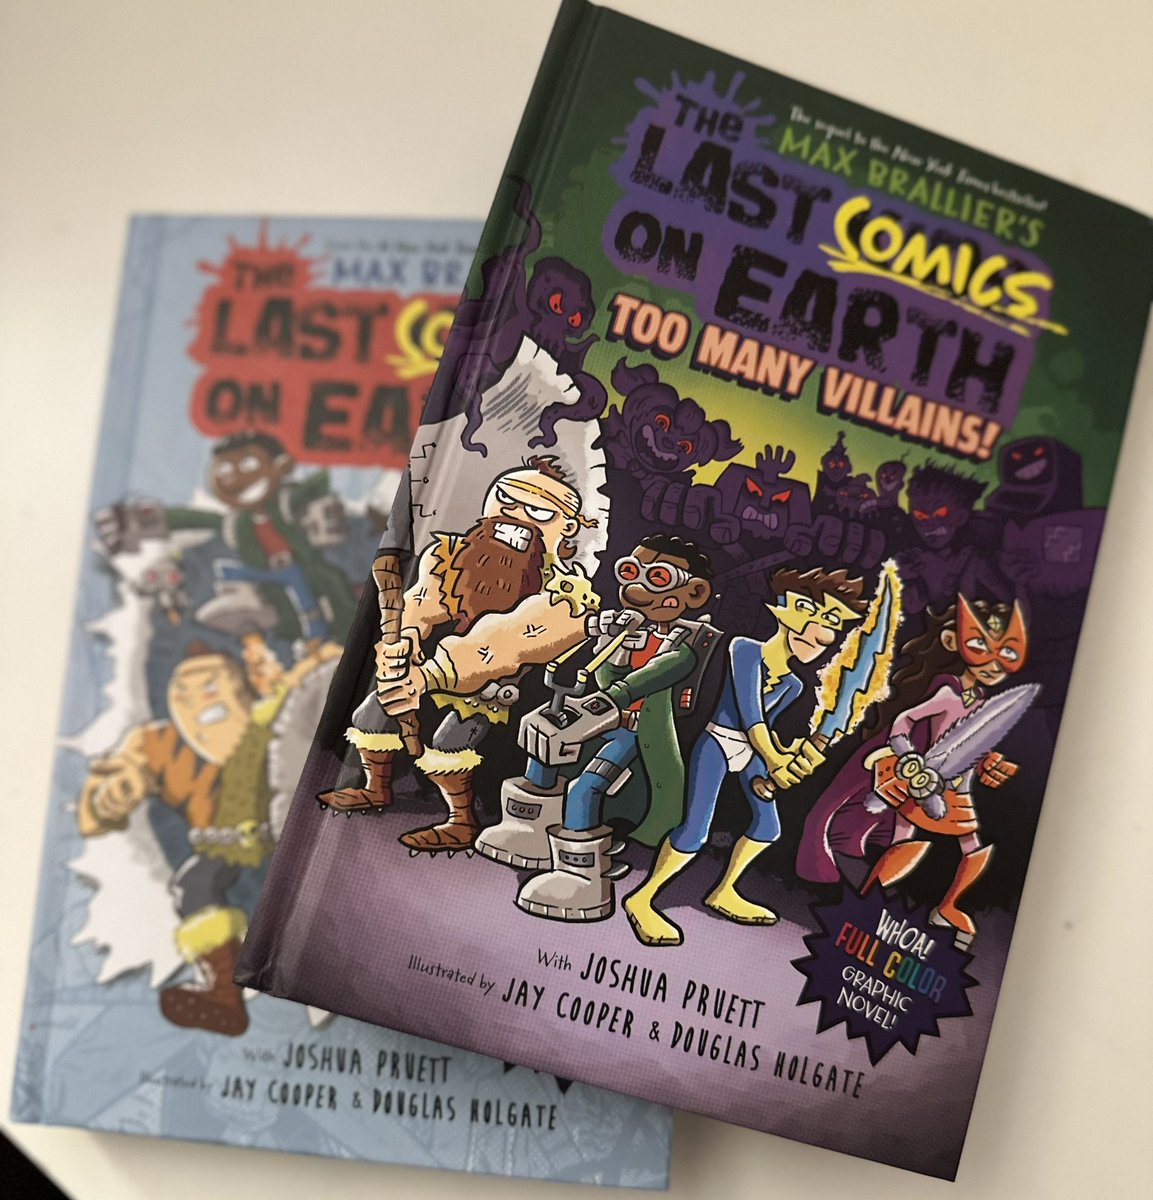 LAST COMICS Book Two, TOO MANY VILLAINS is a real book! And we just sent the final version of book three to our editor! (And then my computer crashed!) @penguinkids